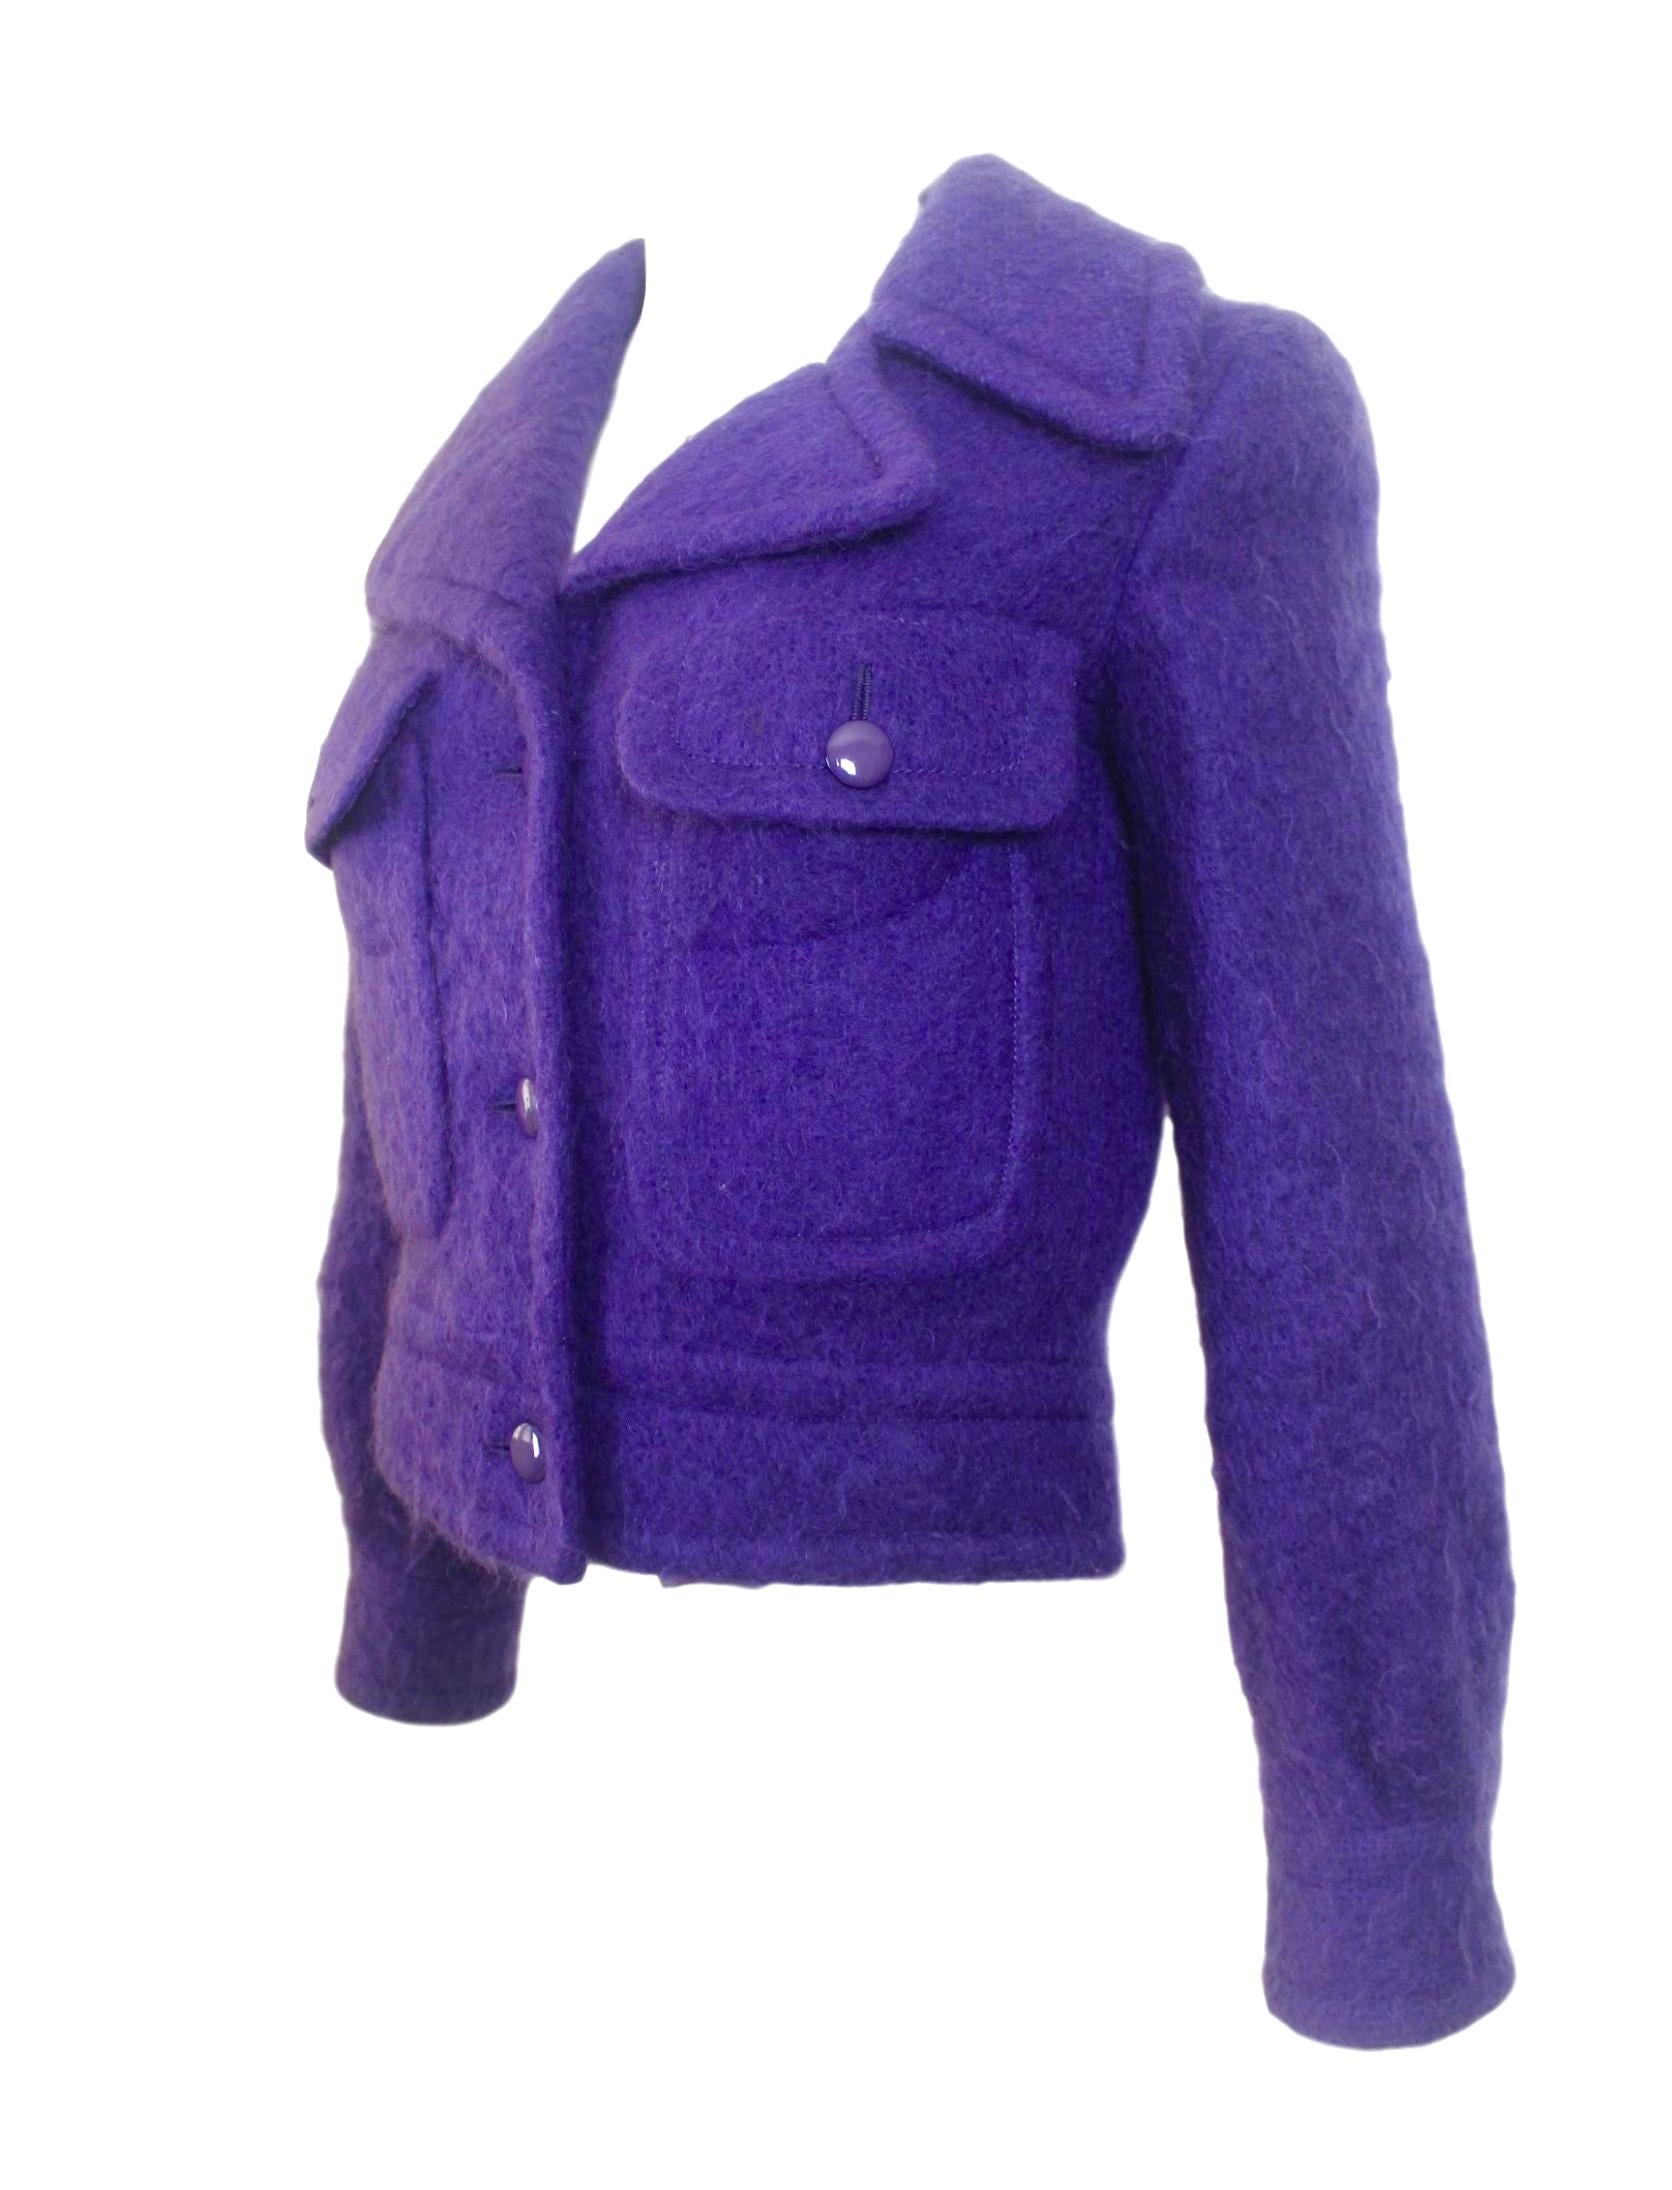 Vintage Pierre Cardin
Early 1960s Label
Mohair Jacket
No Size Label
